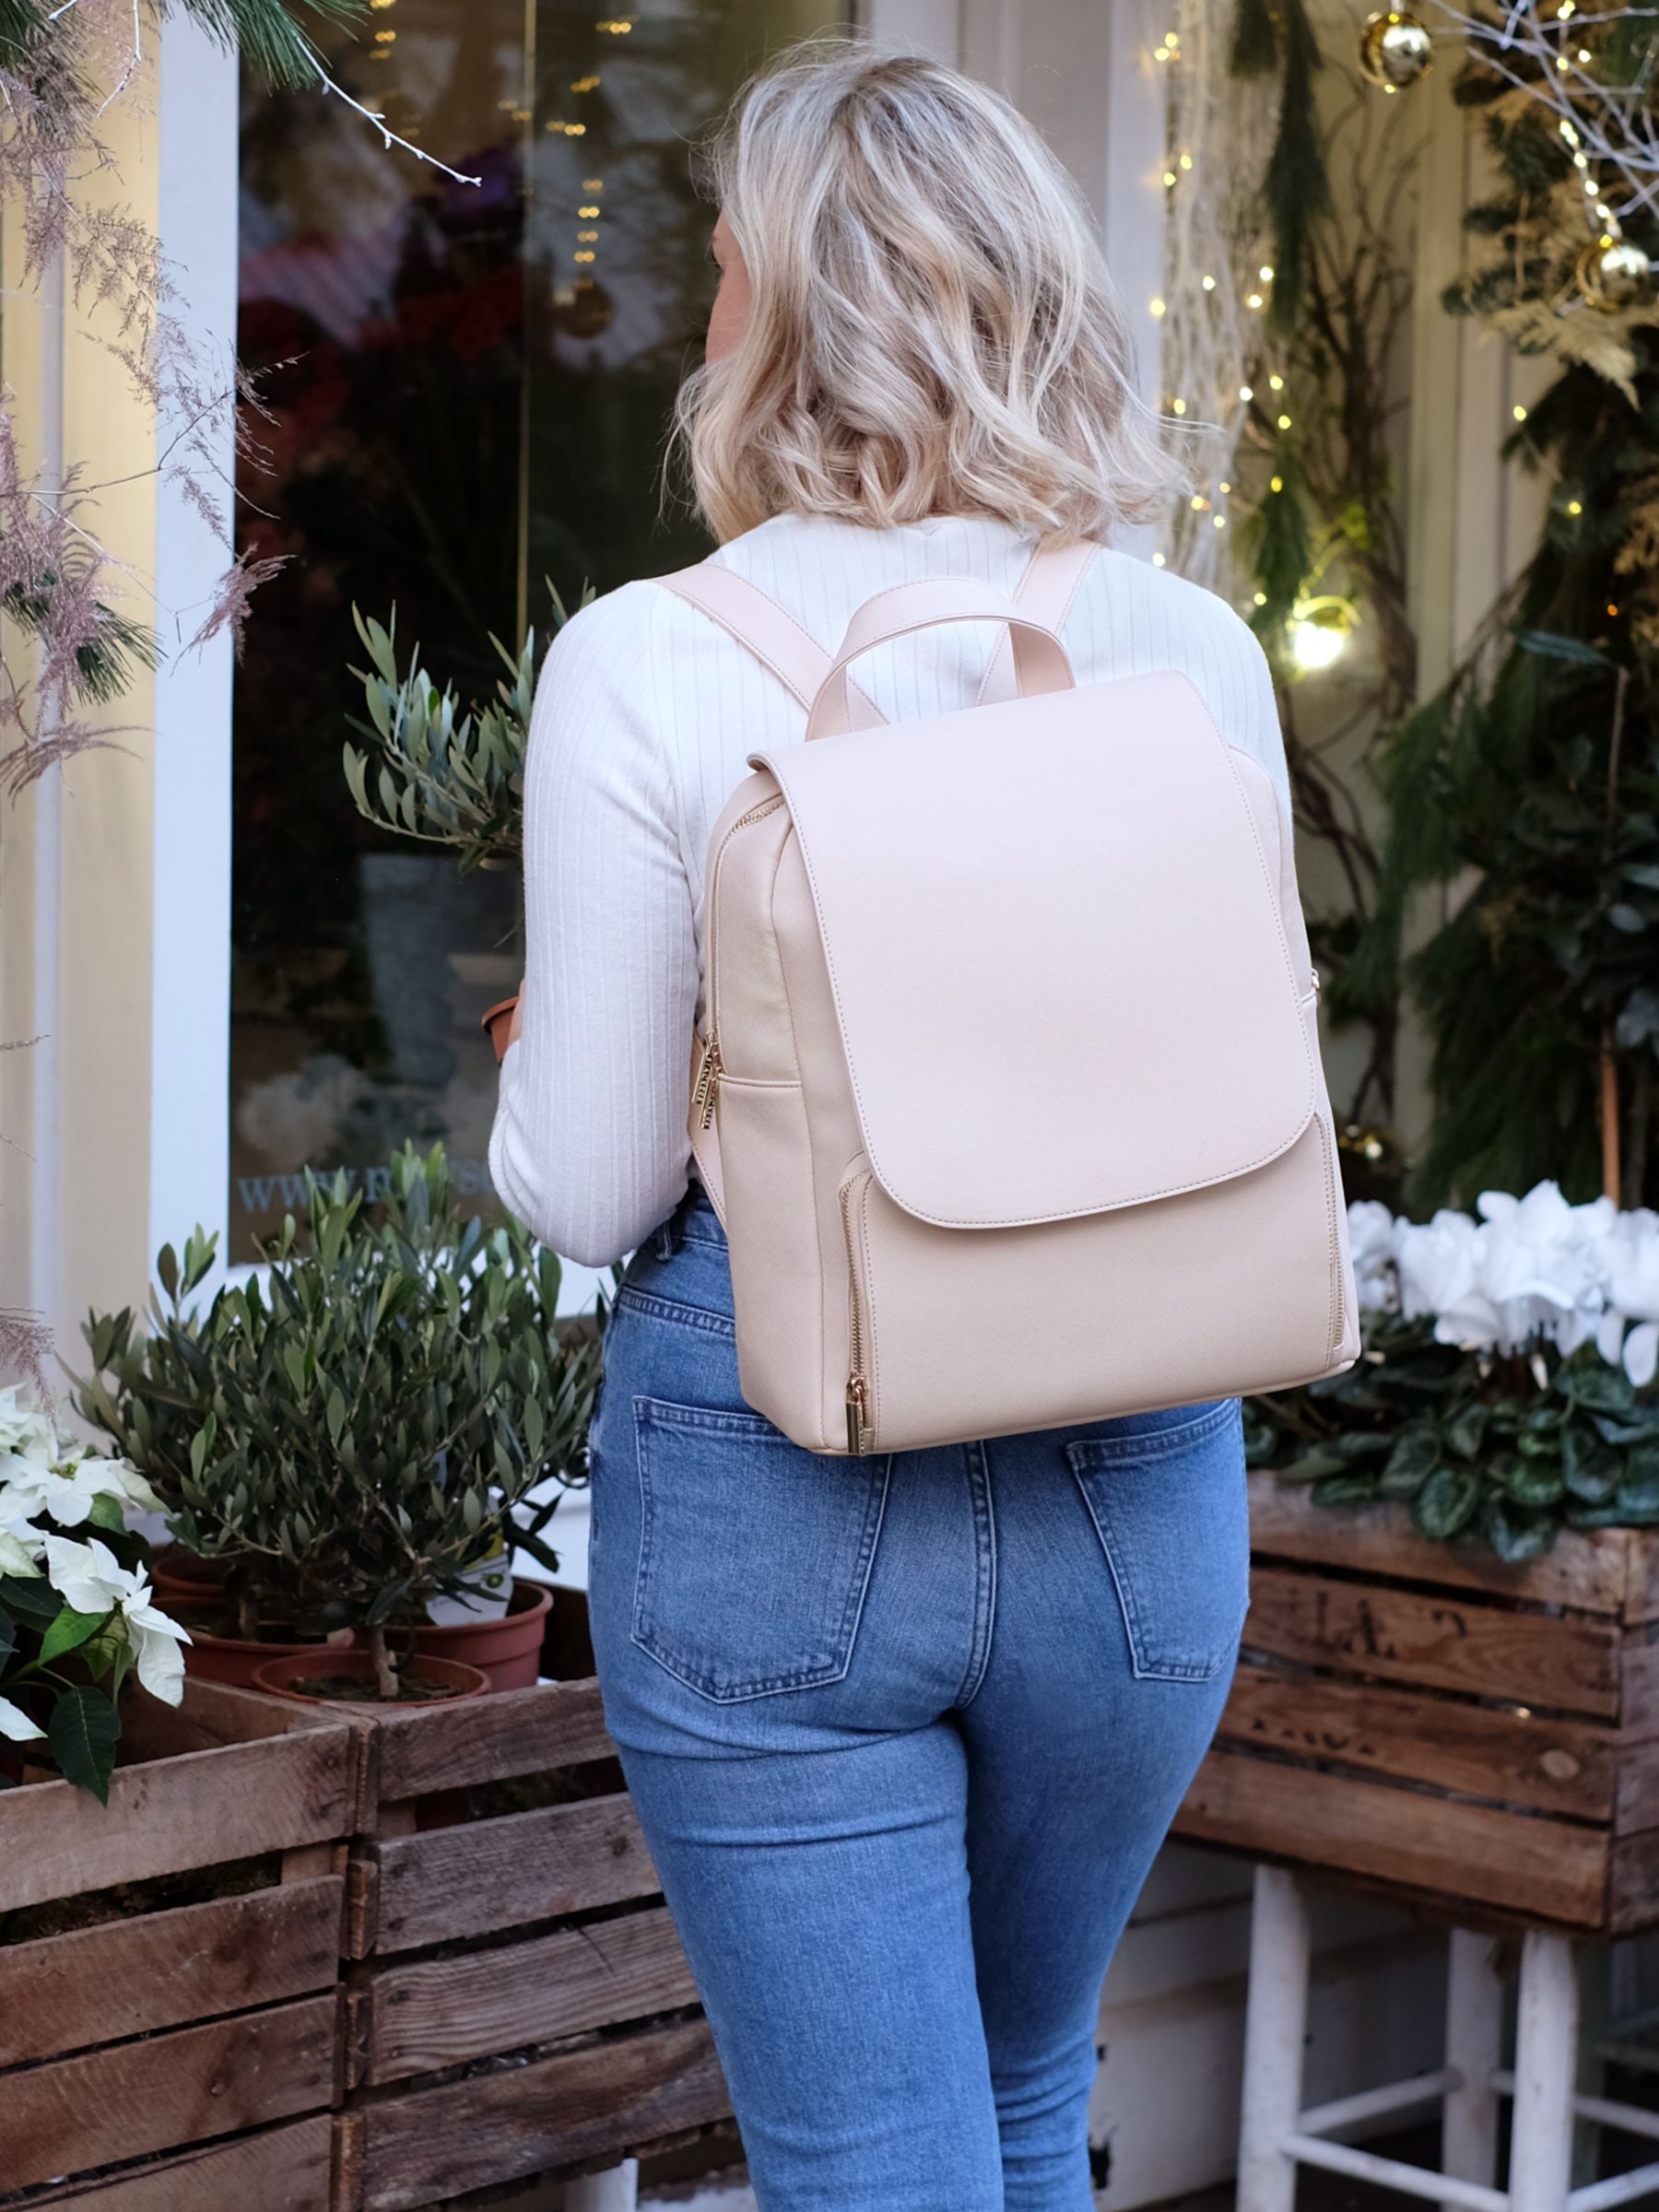 Stackers Laptop Backpack